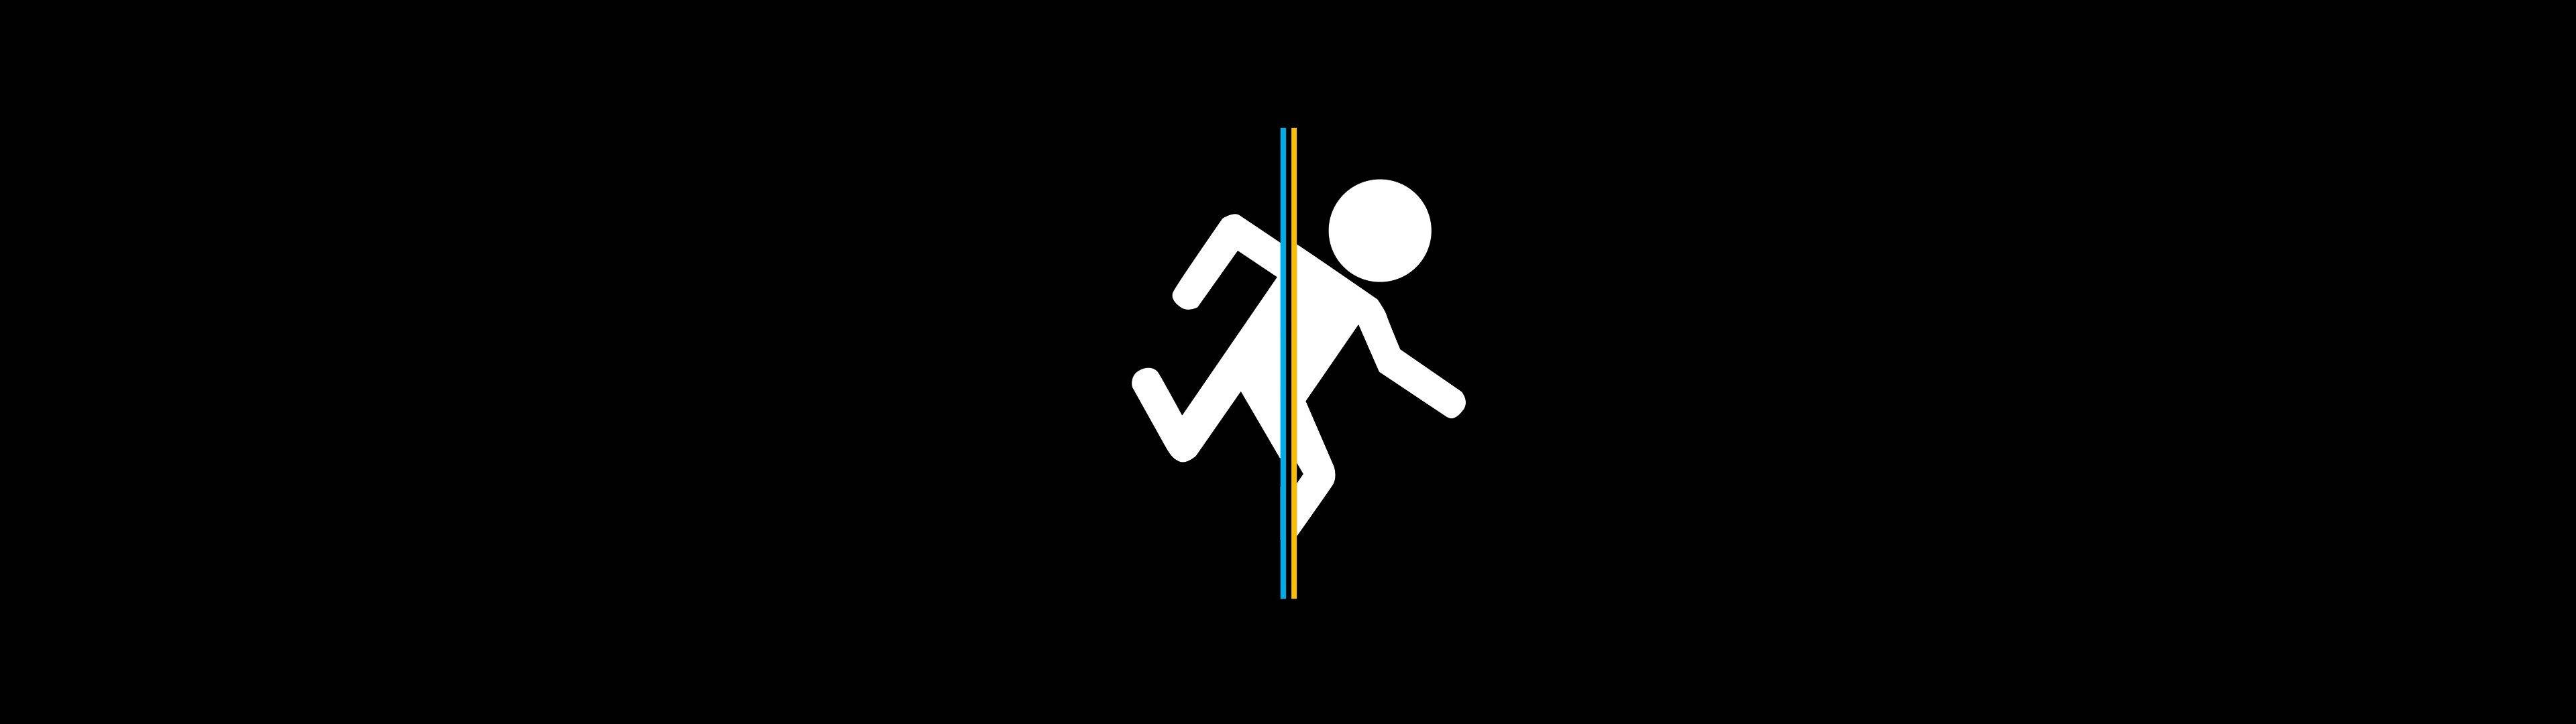 A Person Is Running On A Black Background Wallpaper